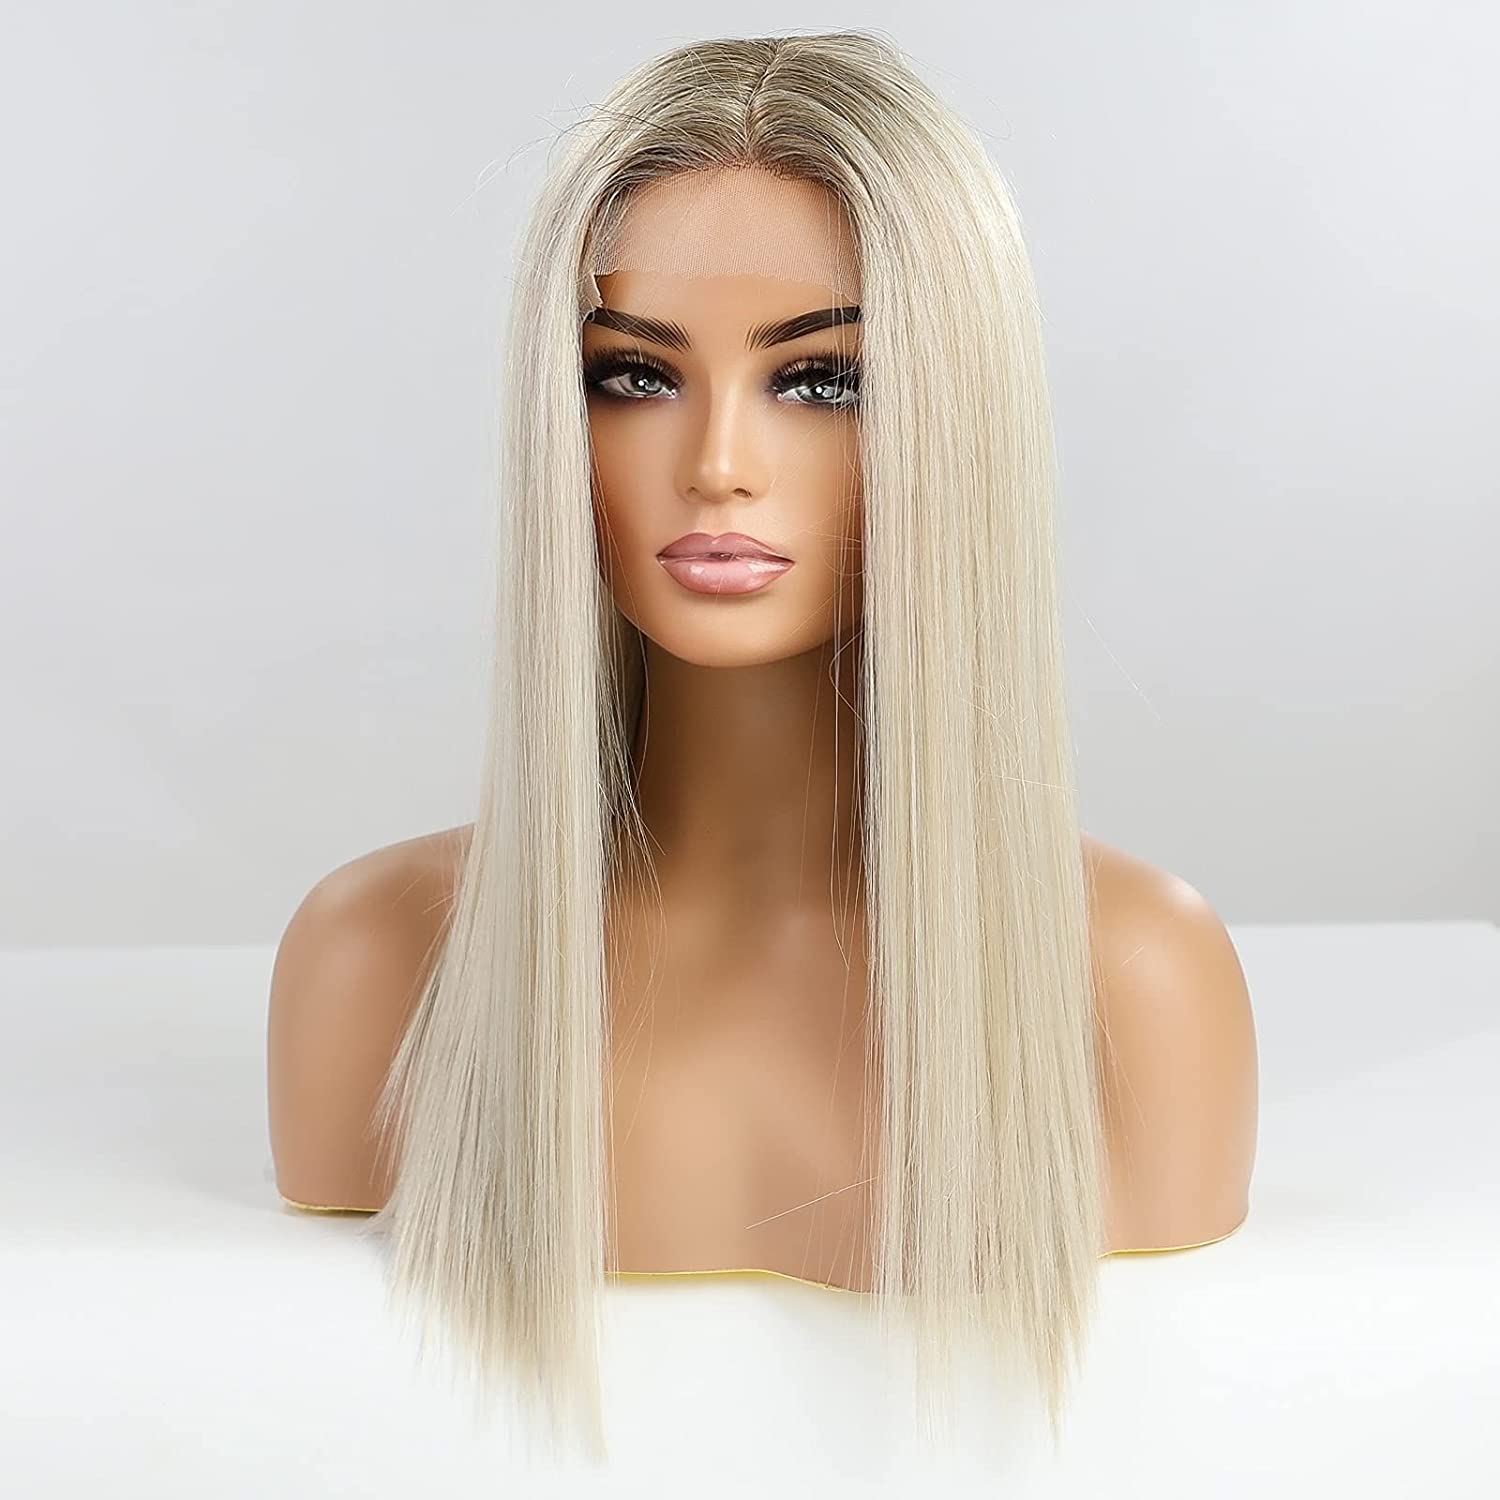 ombre lace front wig,lace wig,synthetic wigs,straight wigs,straight hair wig,wig synthetic,best synthetic wigs,hair wig,lace front wigs for white women wigs for women,hair wigs for women,blonde lace front wigs,blonde synthetic lace front wig,synthetic lace front wigs for women,lace synthetic hair wigs,wigs synthetic hair,long lace front wig straight wigs for women,wigs straight hair,wigs straight,lace synthetic blonde wig,ombre plantium blonde lace front wig